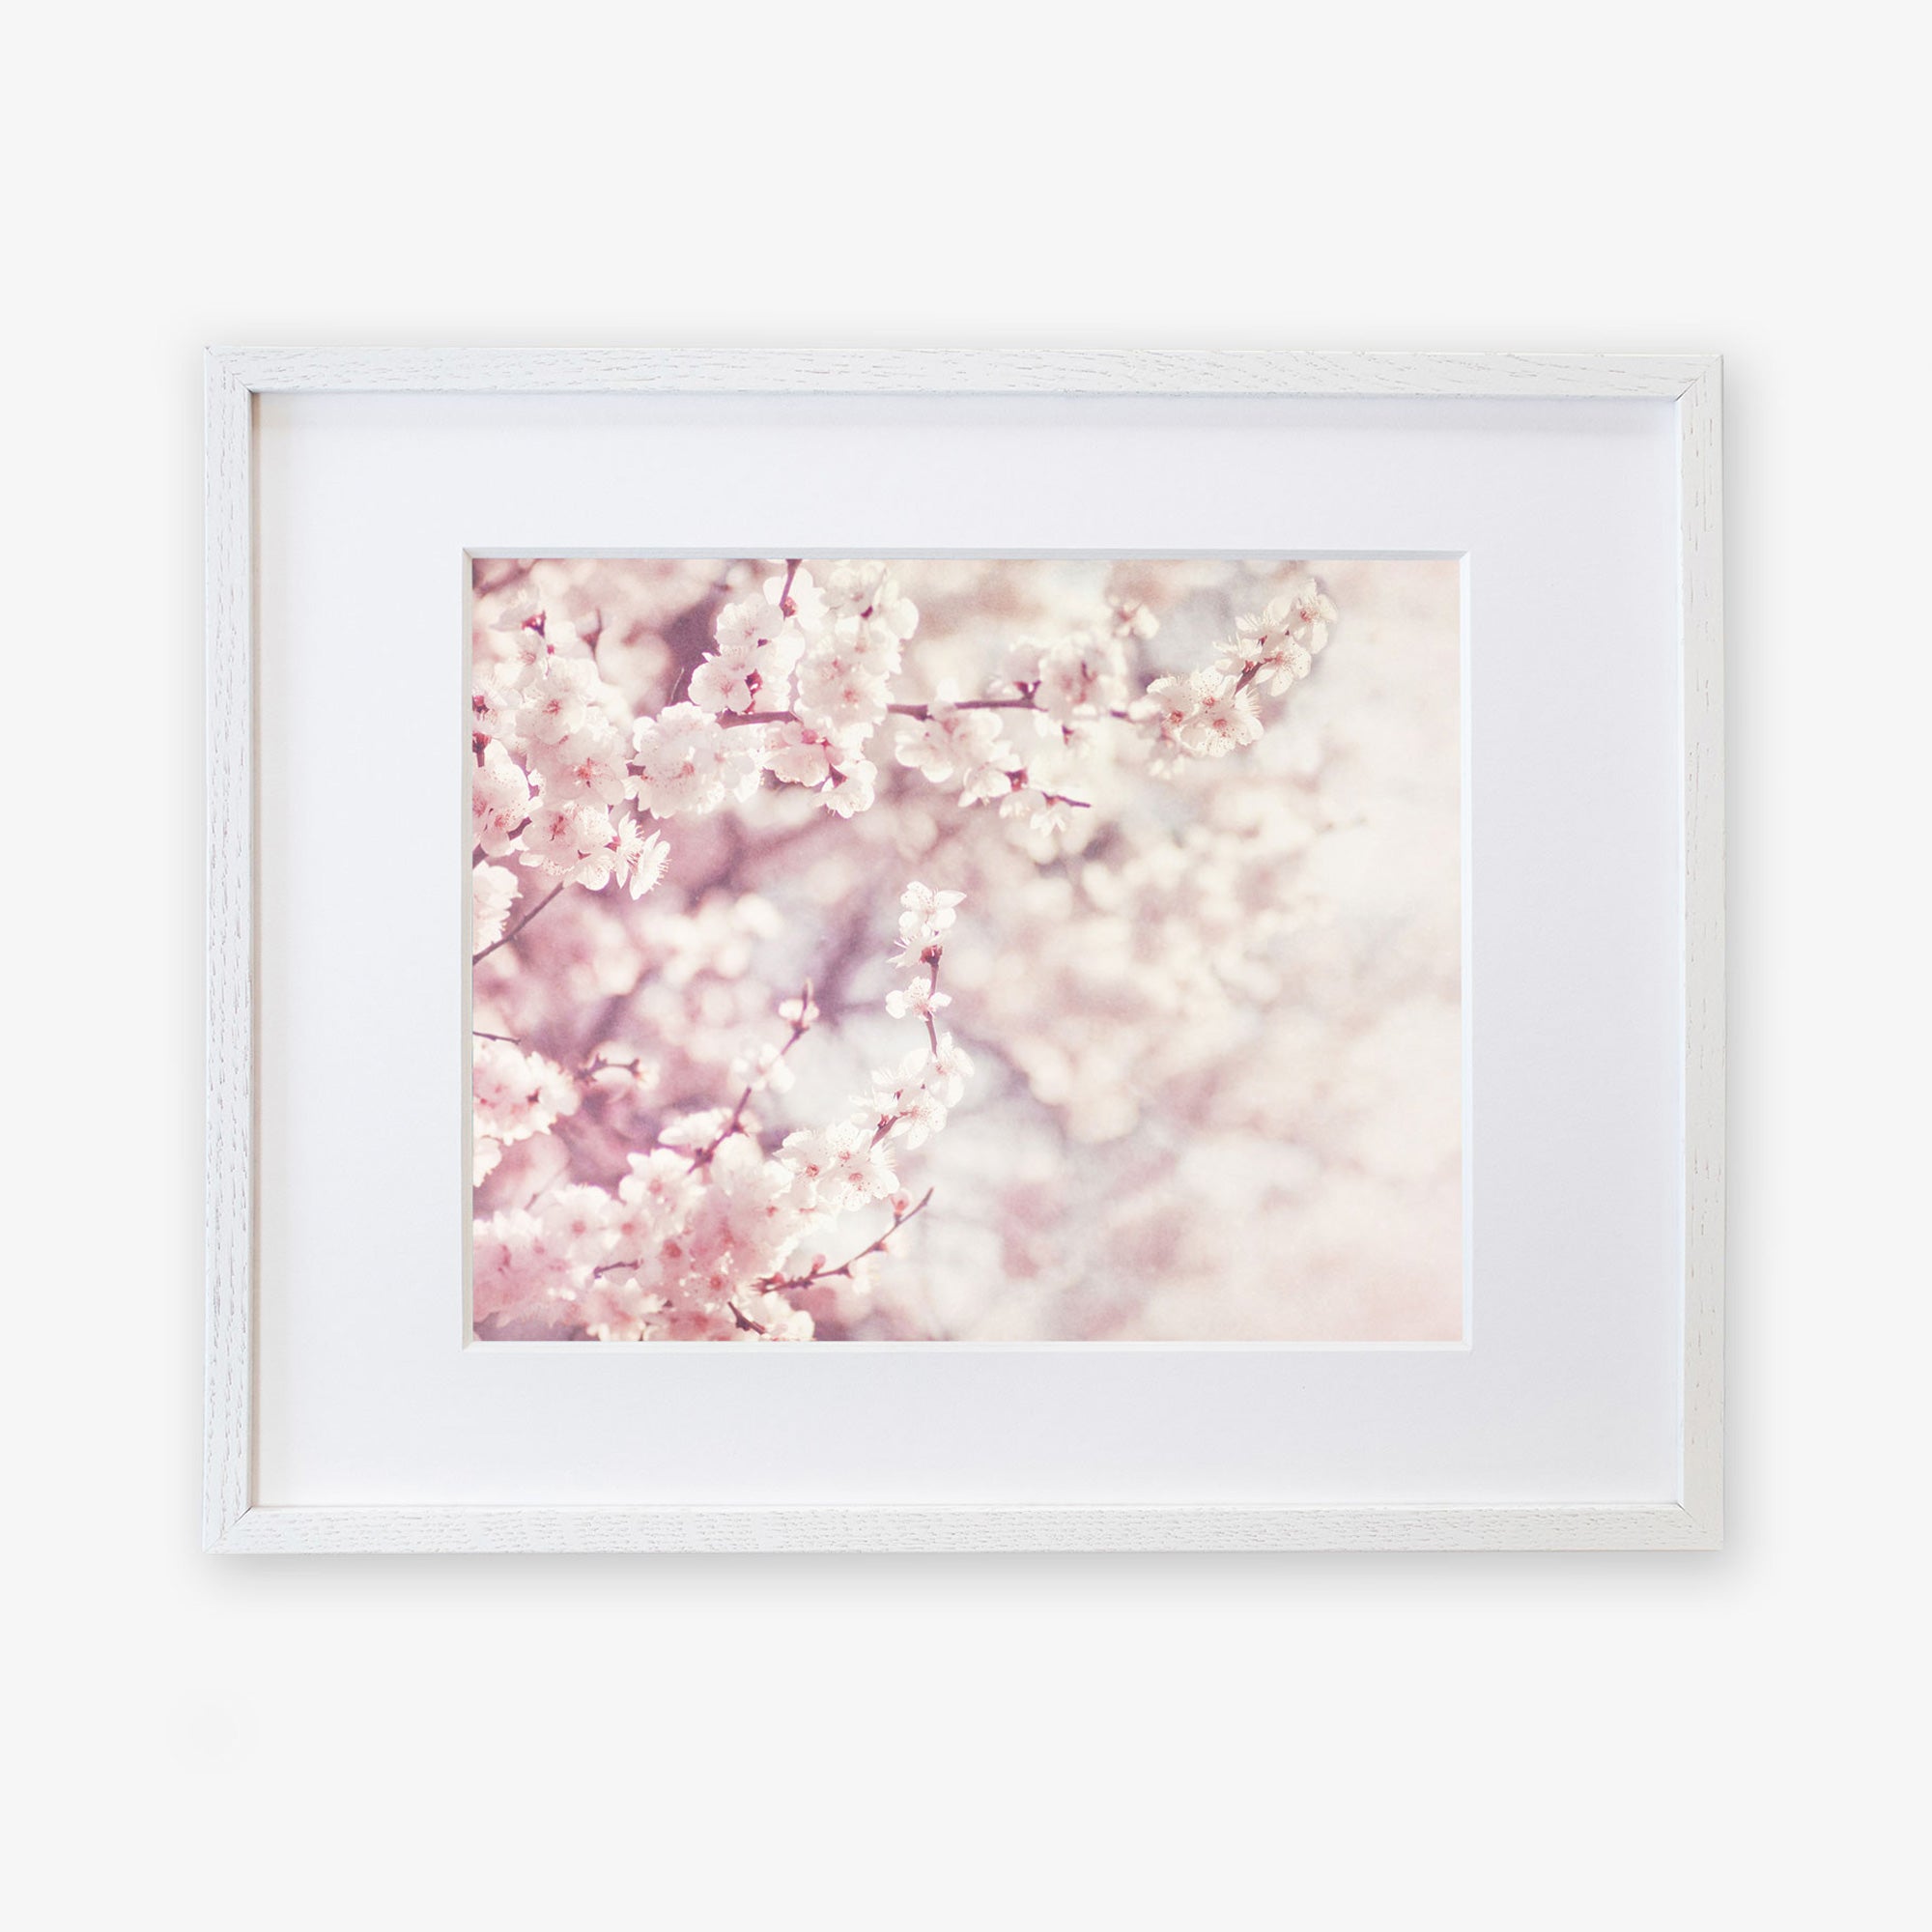 A framed photograph of cherry blossoms in full bloom, printed on archival photographic paper, featuring soft pink colors and delicate flowers densely clustered along the branches, displayed against a blurred background - Offley Green's Pink Floral Print, 'Dreamy Blossom'.